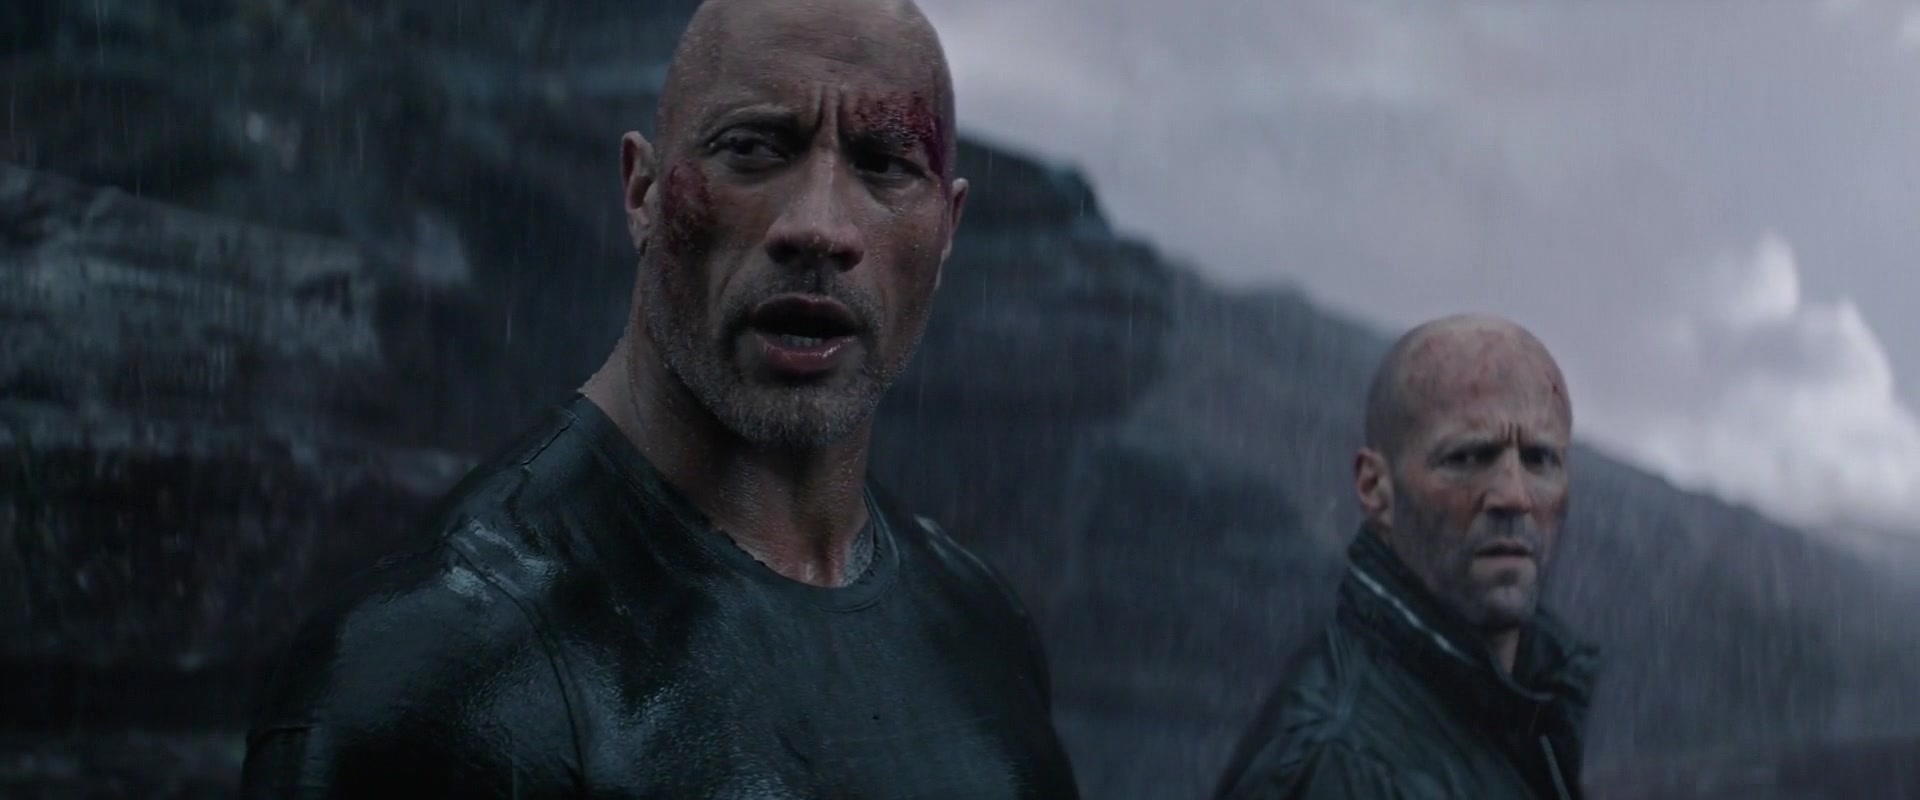 Lucas Hobbs (Dwayne 'The Rock' Johnson) and Deckard Shaw (Jason Statham) stand victorious in Fast & Furious Presents: Hobbs & Shaw (2019), Universal Pictures